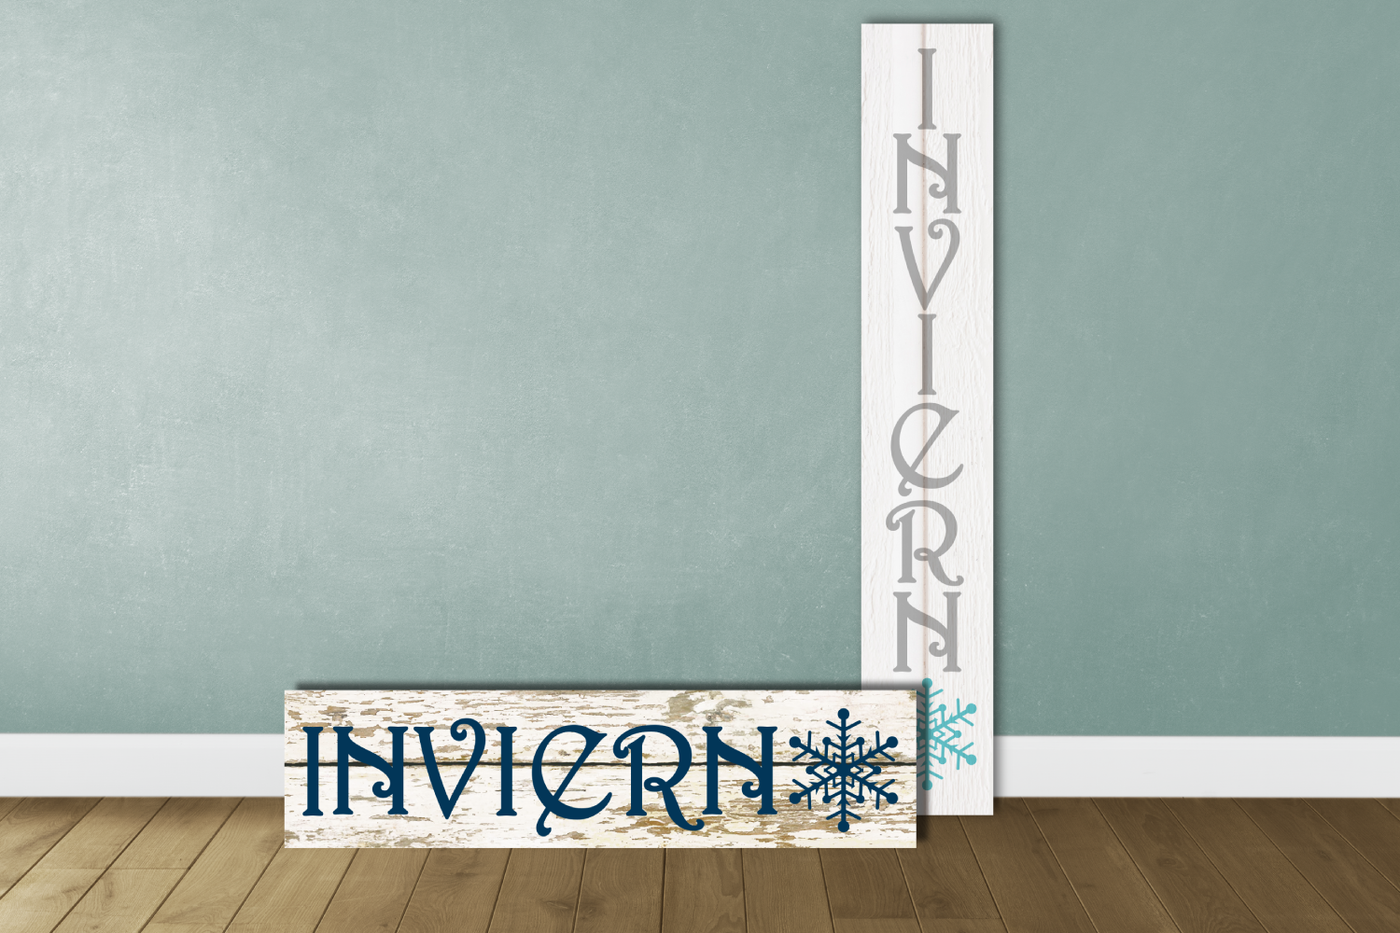 A horizontal and a vertical wooden sign. Each says "Invierno" with a snowflake in place of the O.